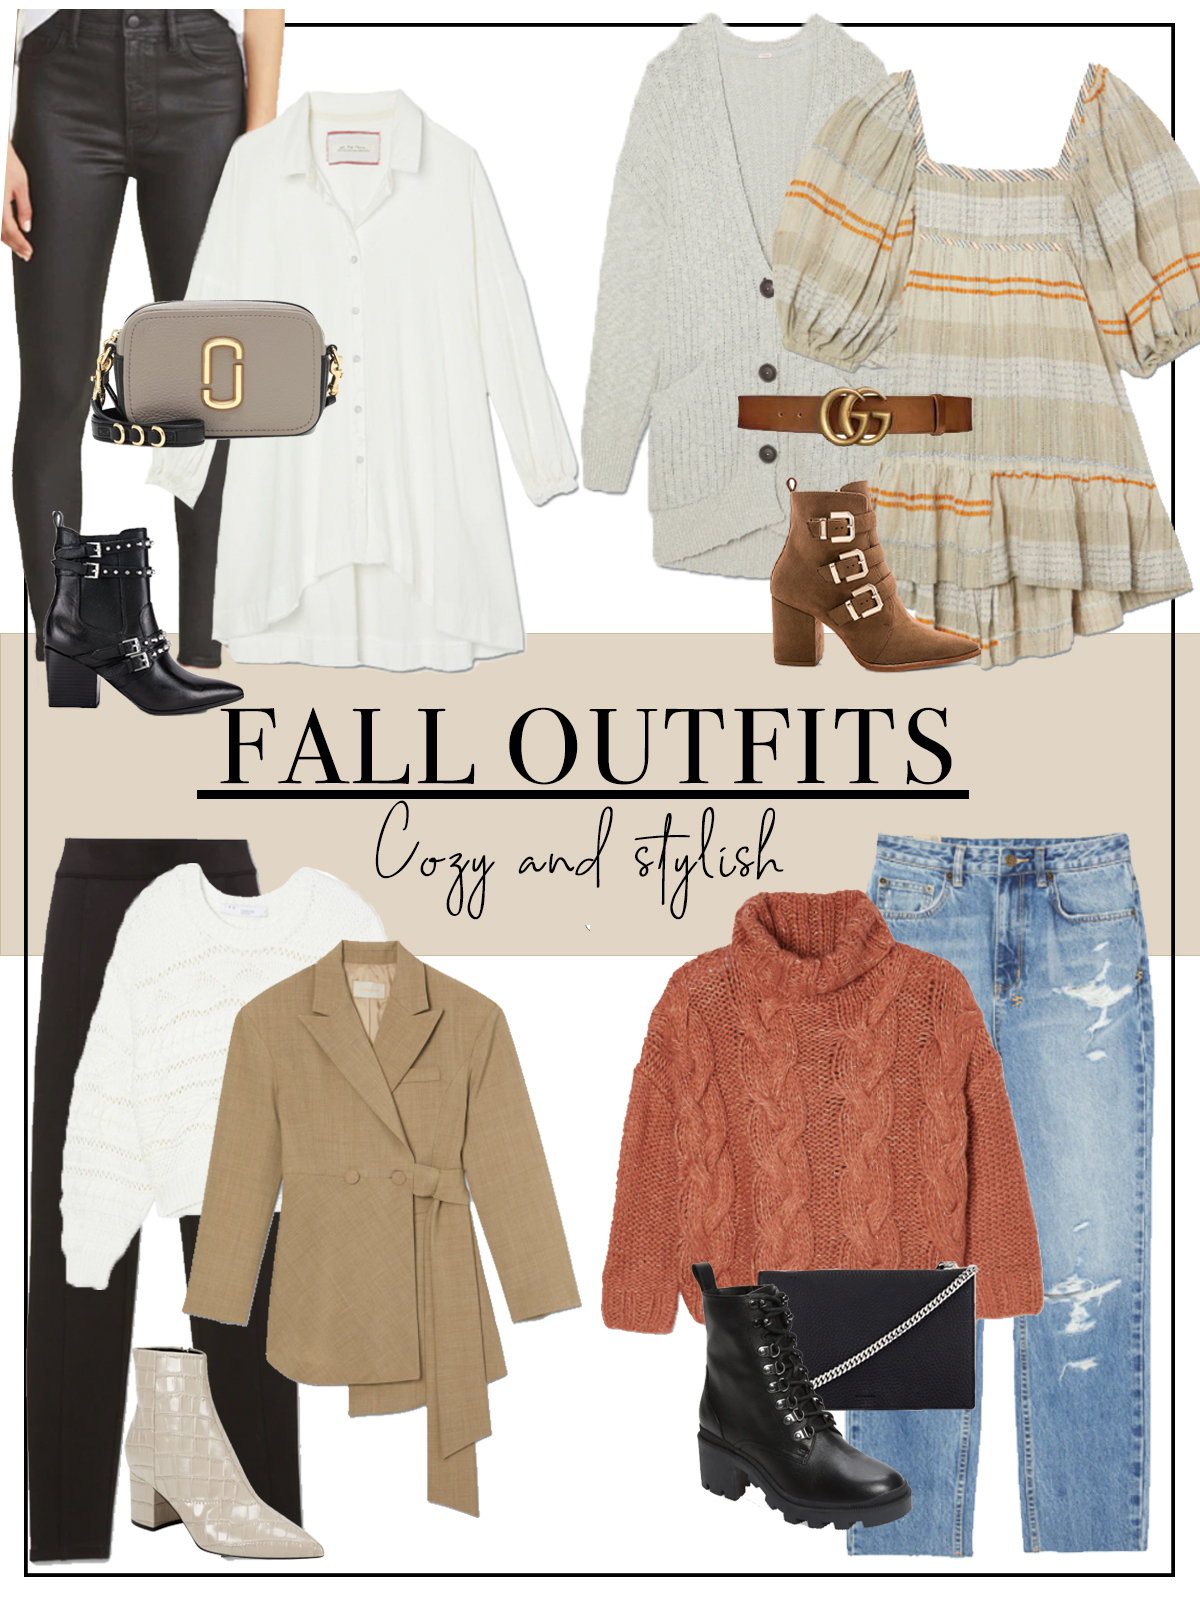 FALL OUTFIT IDEAS FROM MY FAVORITE RETAILERS! - CHIC TALK | CHIC TALK